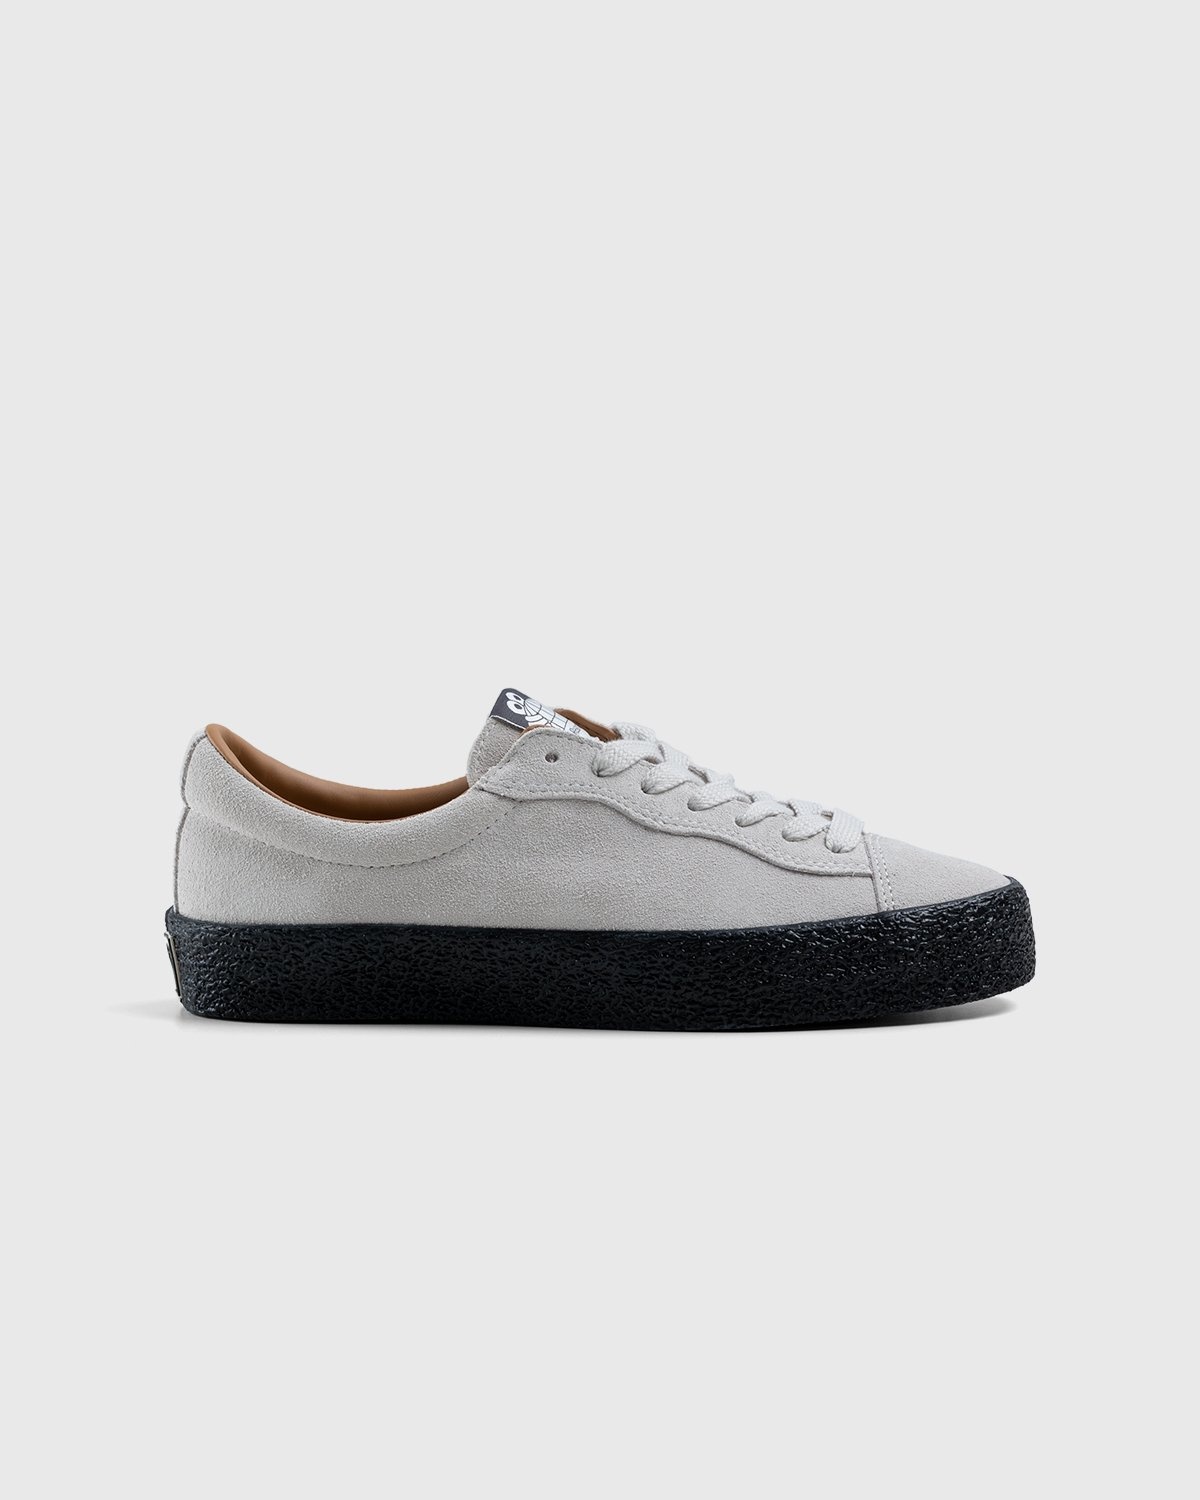 Last Resort AB – VM002 Suede Lo White/Black - Low Top Sneakers - White - Image 1